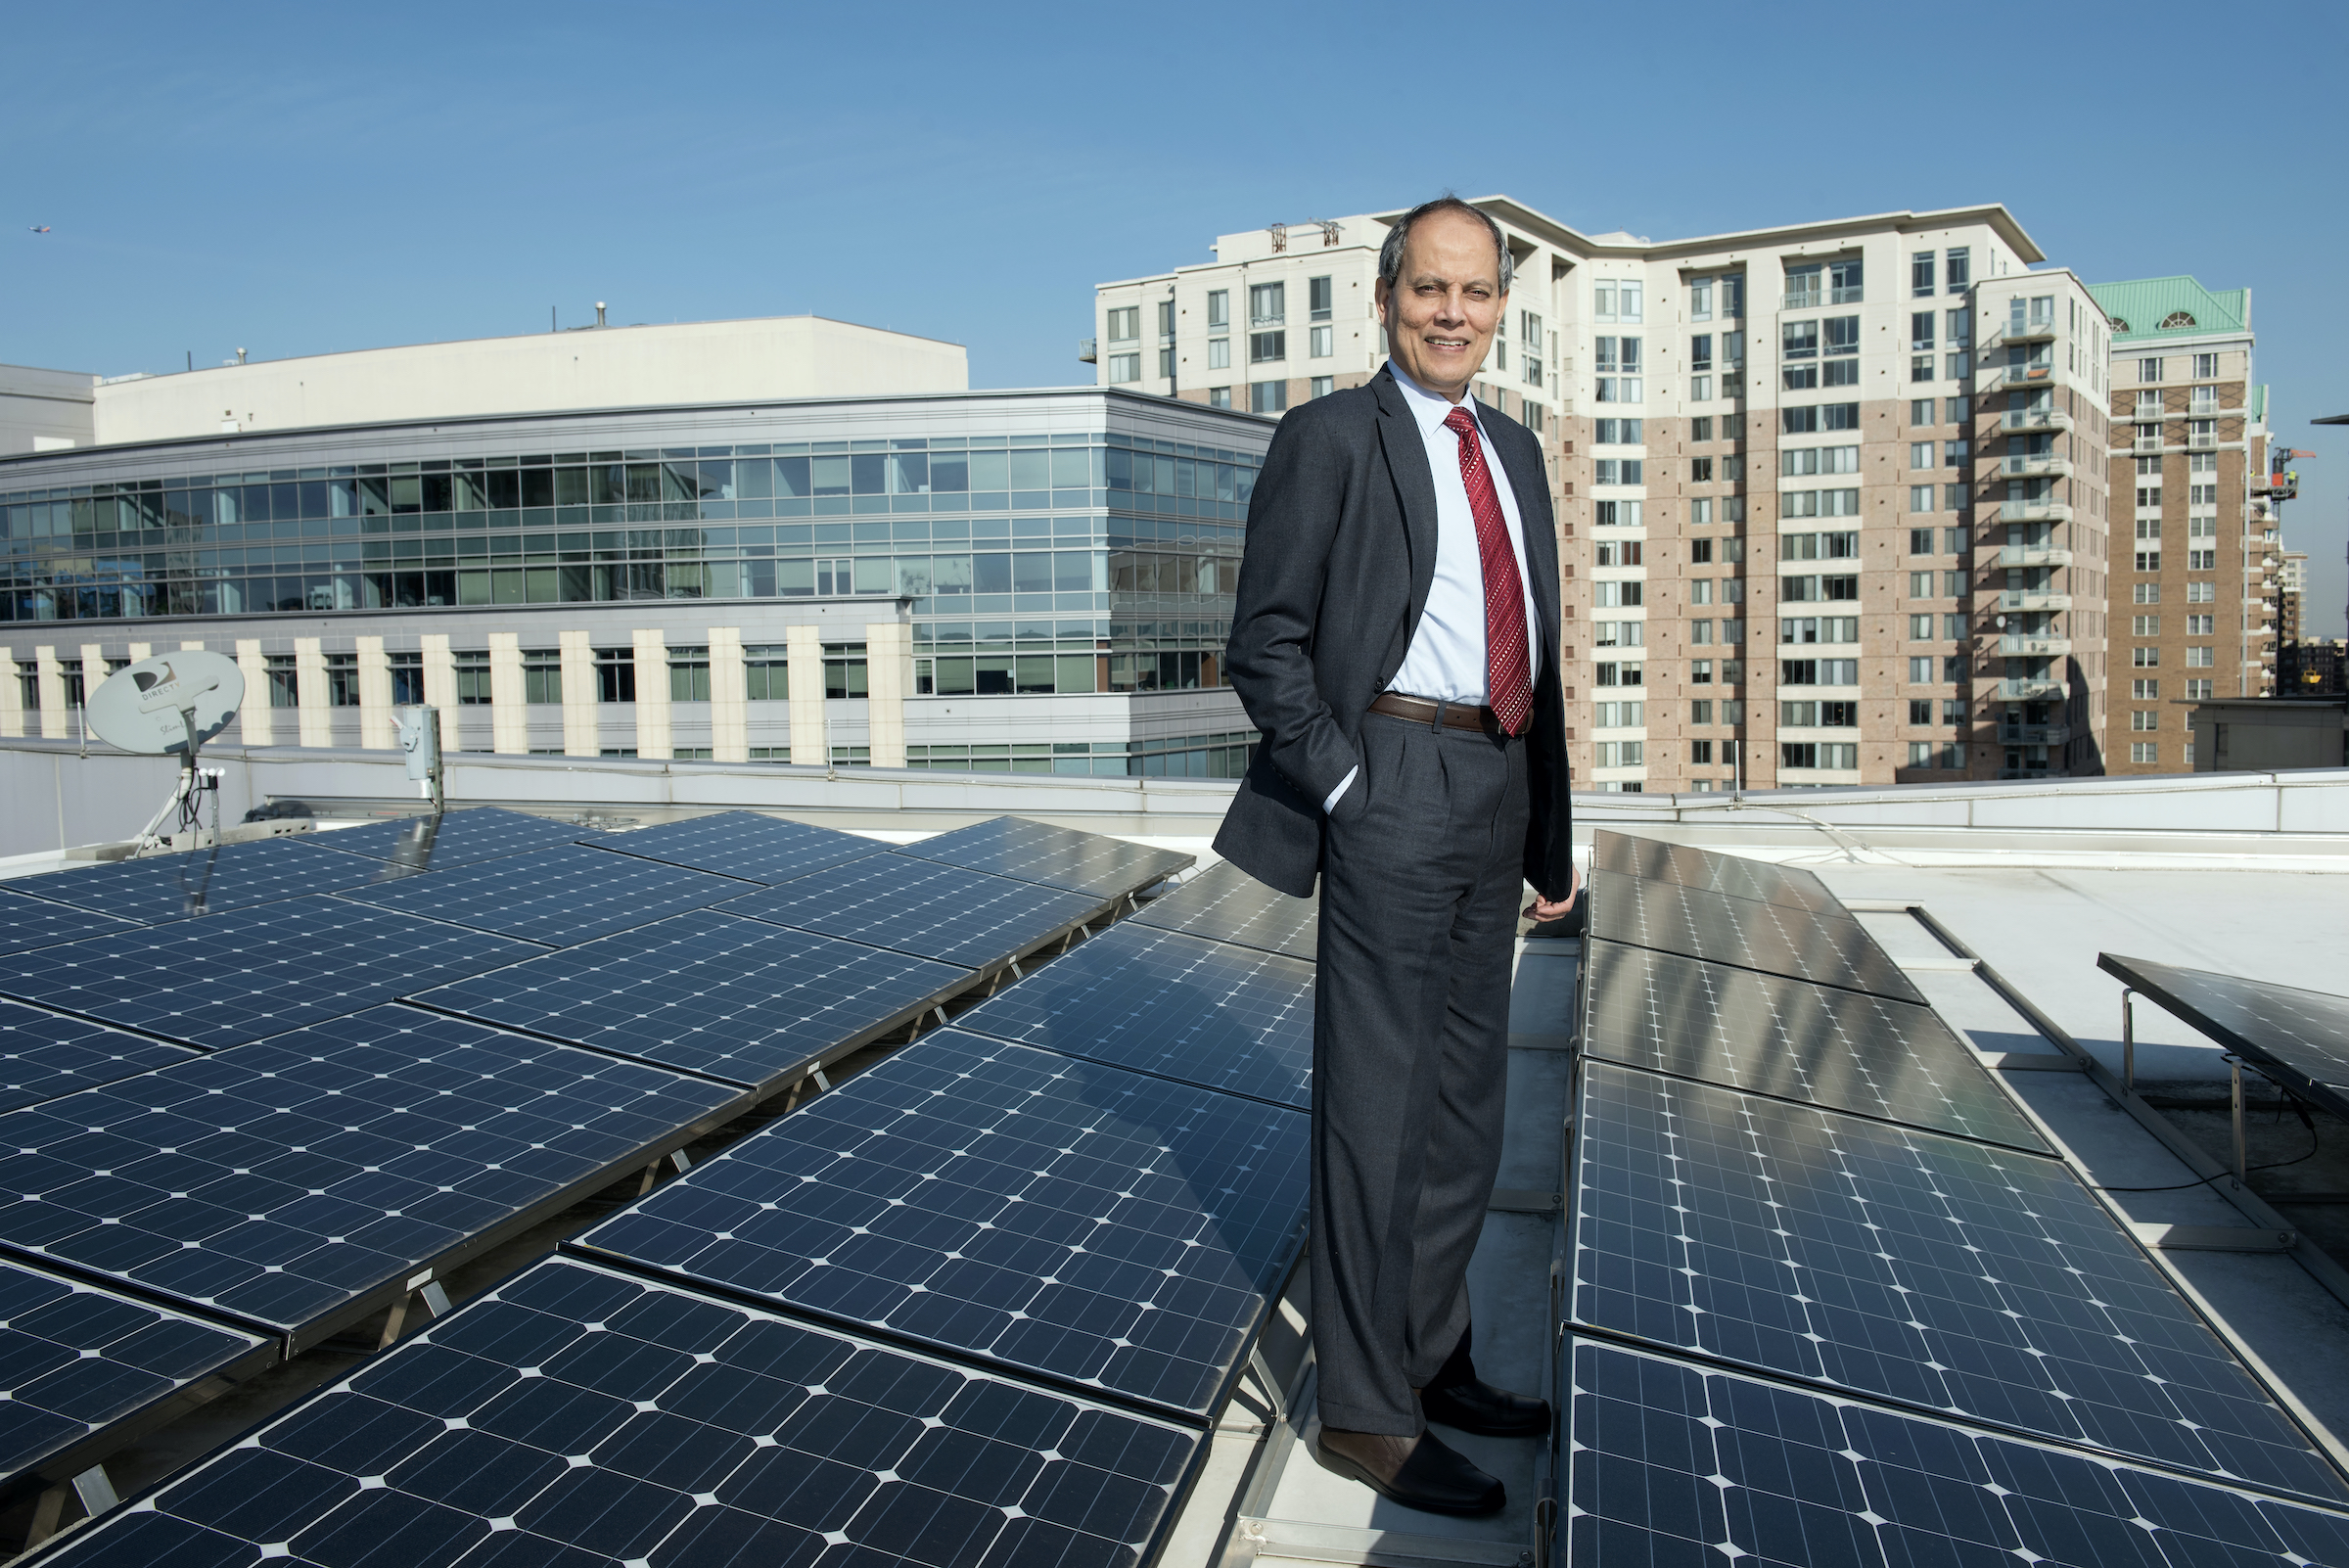 Saifur Rahman, Advanced Research Institute, with his photovoltaic installation on the roof of Virginia Tech's Arlington Research Center in Arlington, VA.